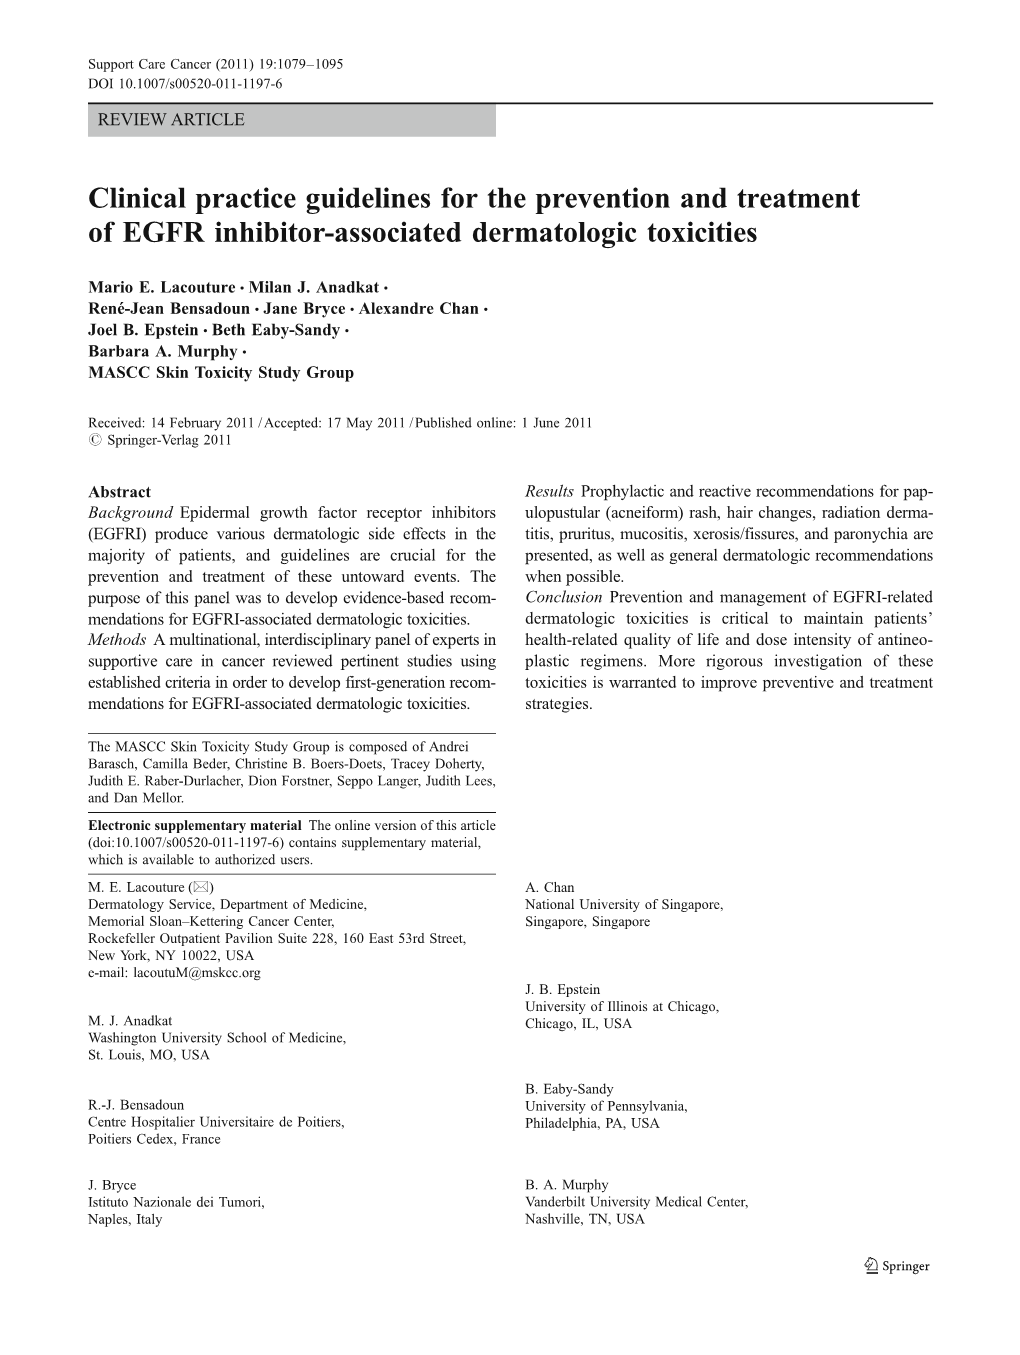 Clinical Practice Guidelines for the Prevention and Treatment of EGFR Inhibitor-Associated Dermatologic Toxicities